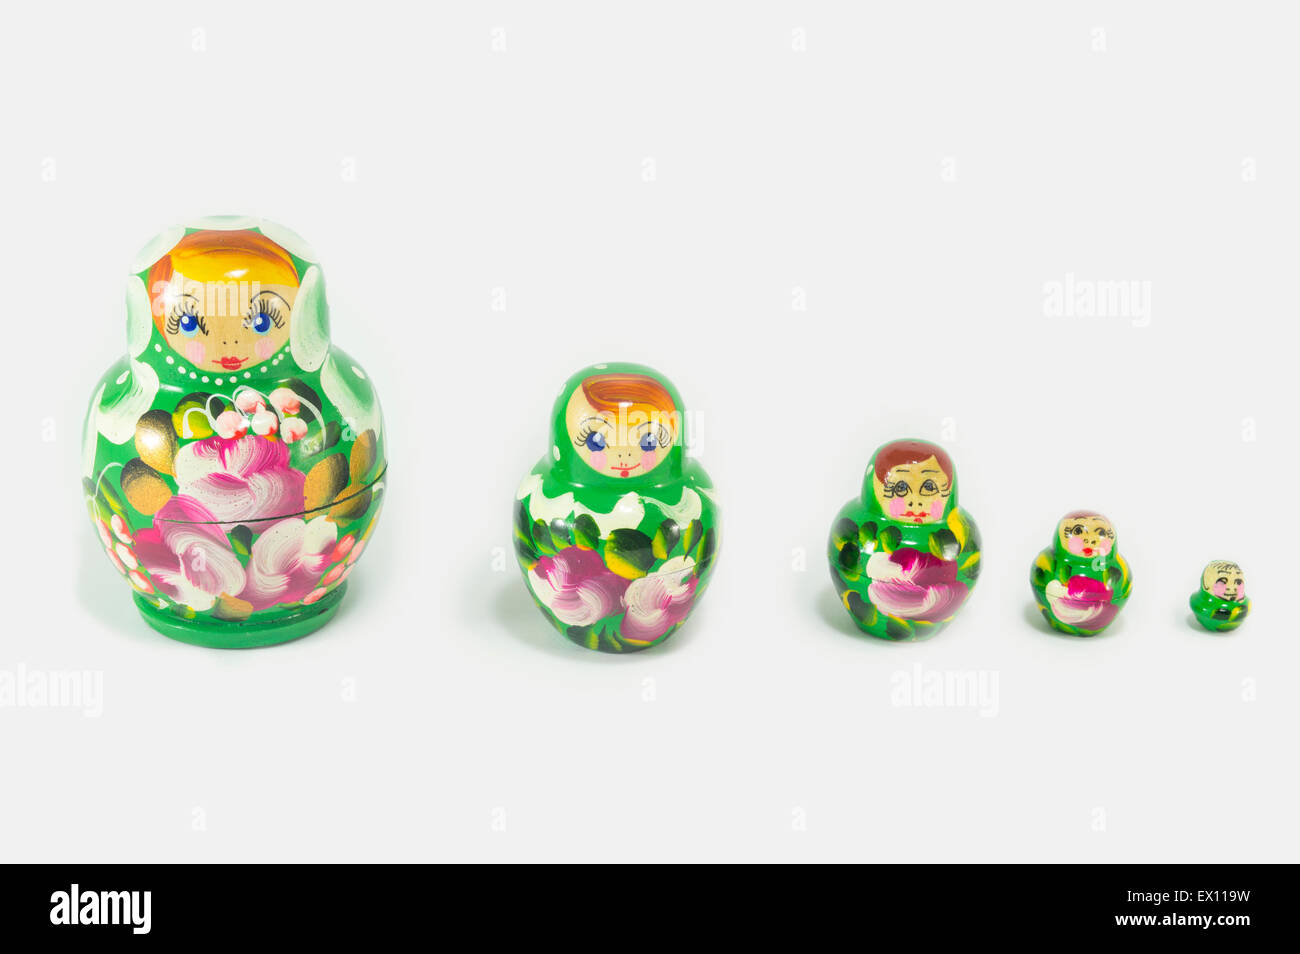 Russian dolls on white background Stock Photo